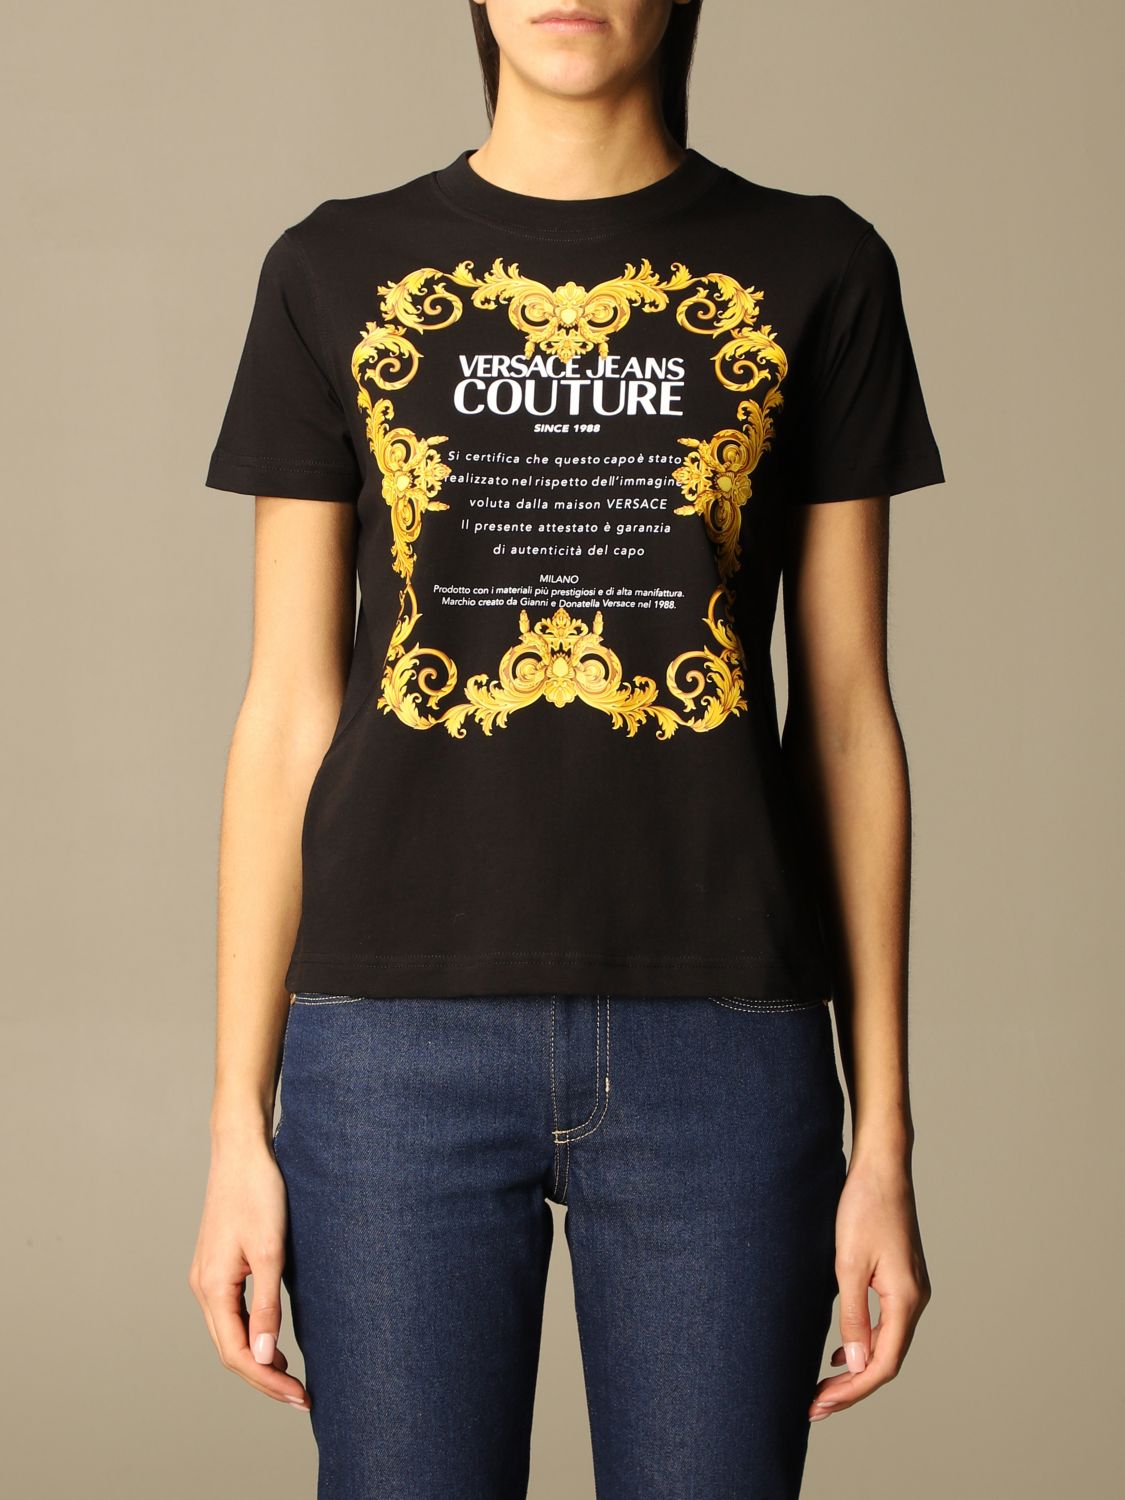 versace jeans couture t-shirt